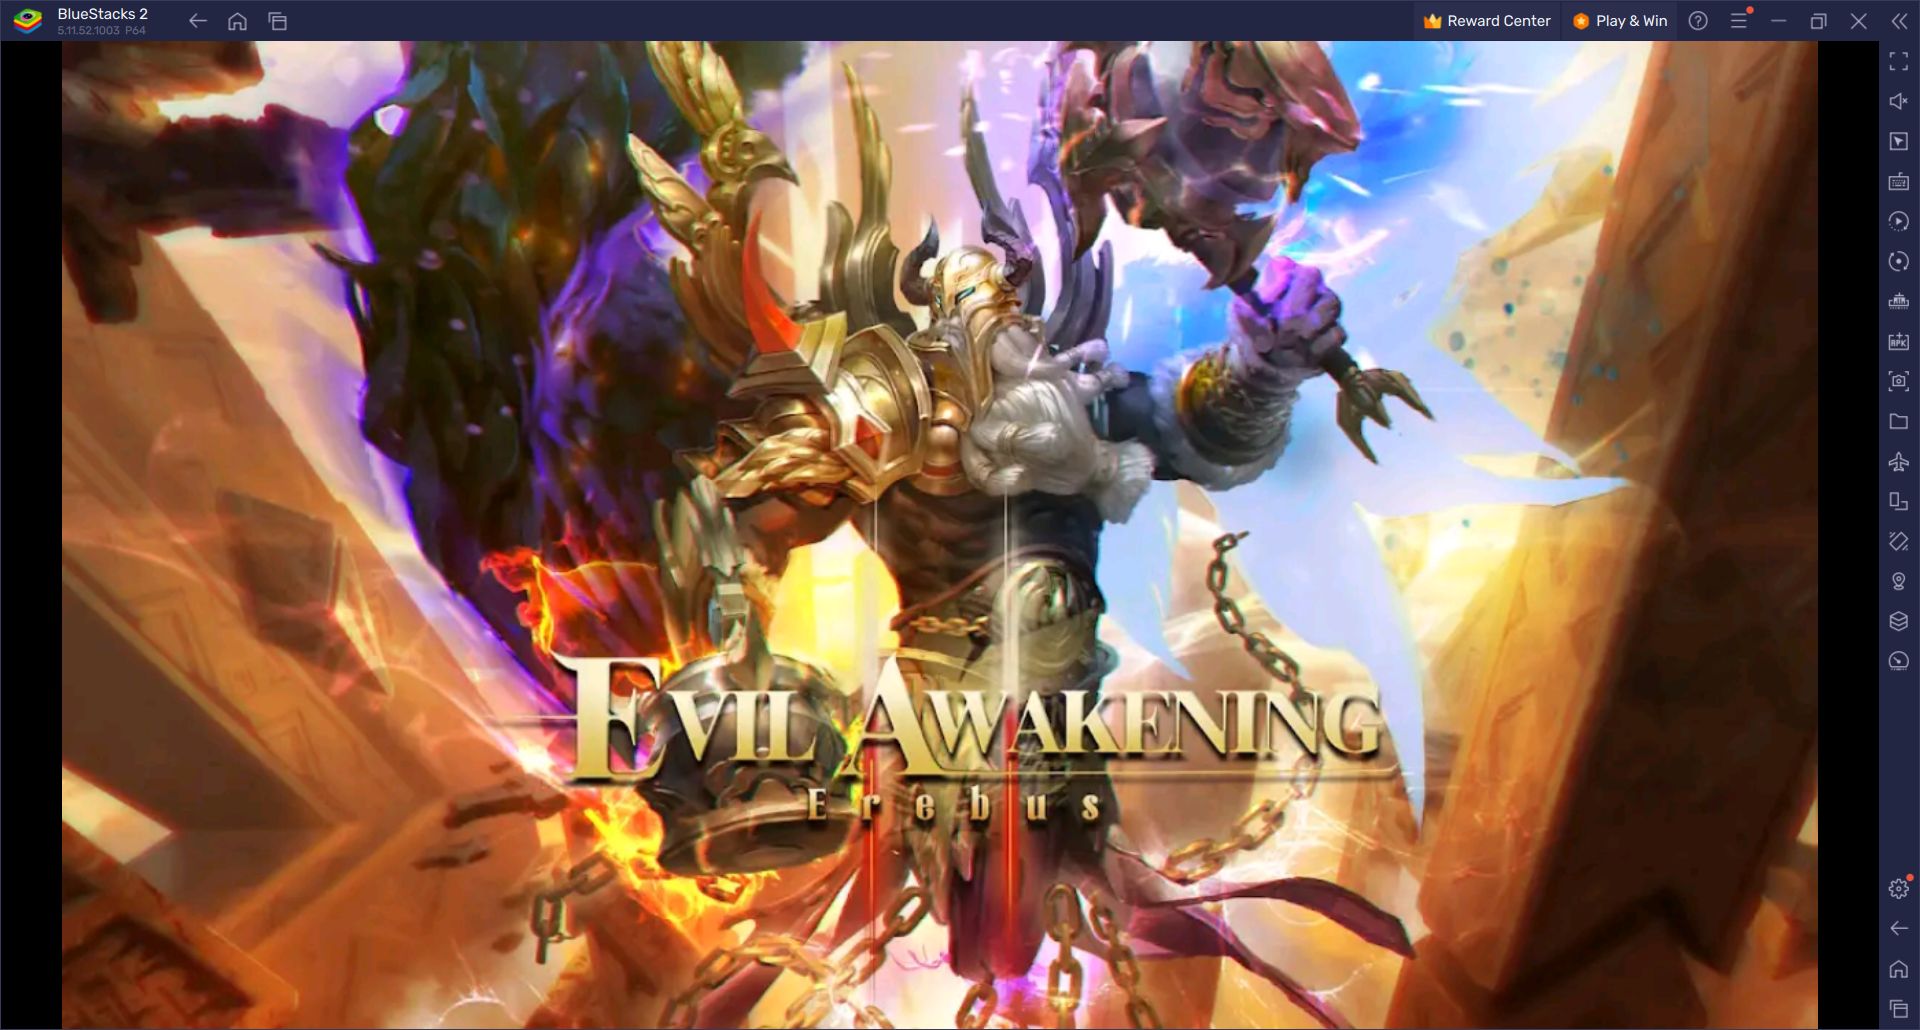 Legends of Learning Awakening Gameplay First Look (Android APK) 